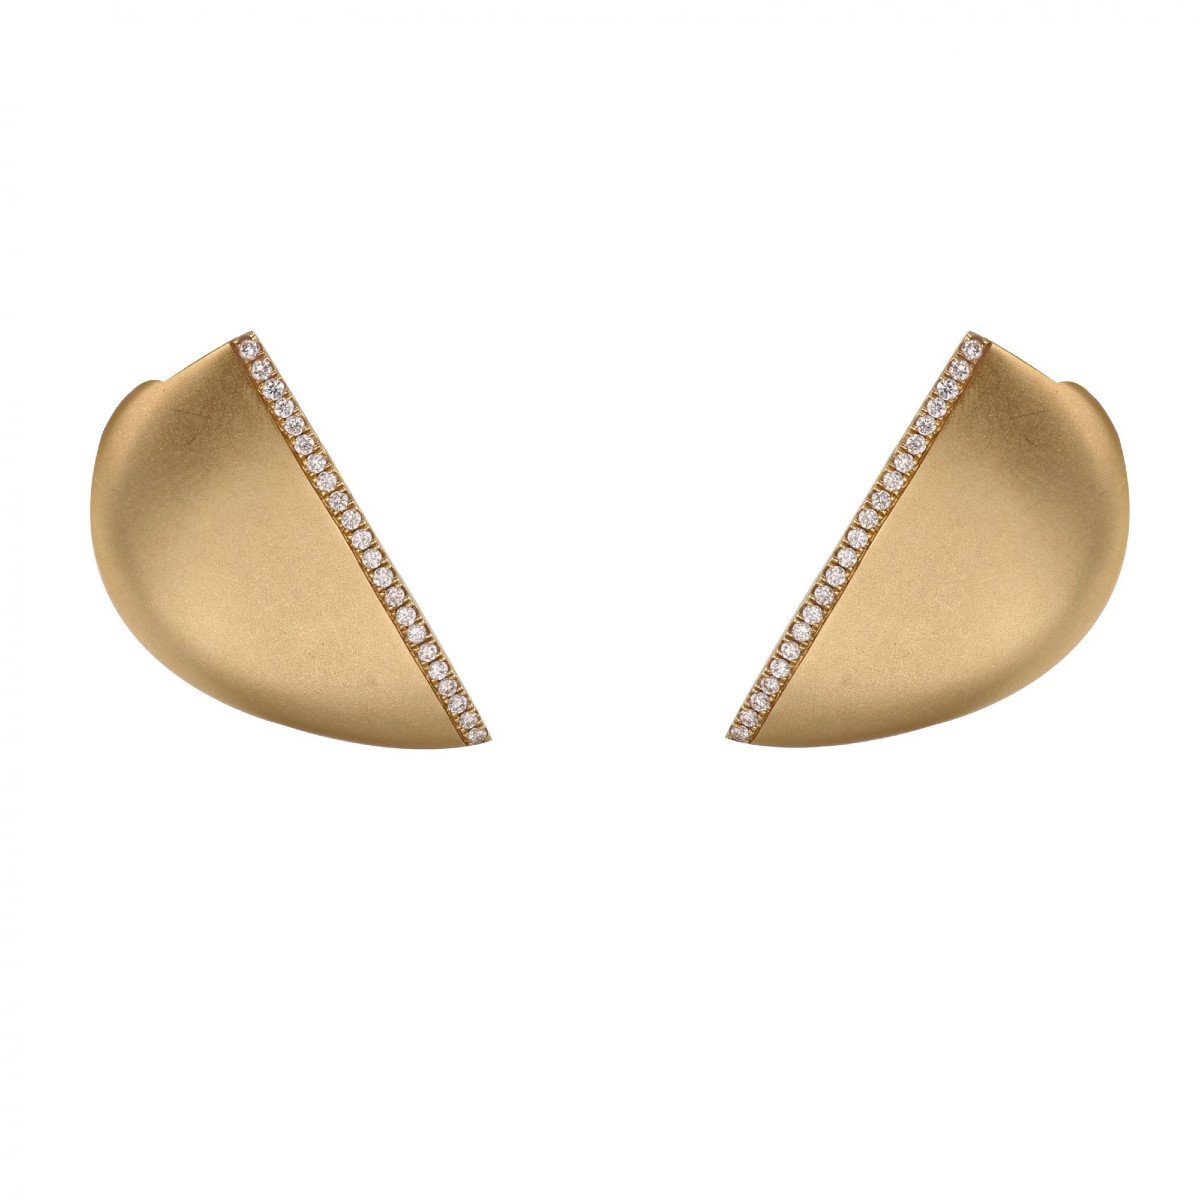 Ofée Brushed Gold And Diamonds Earrings